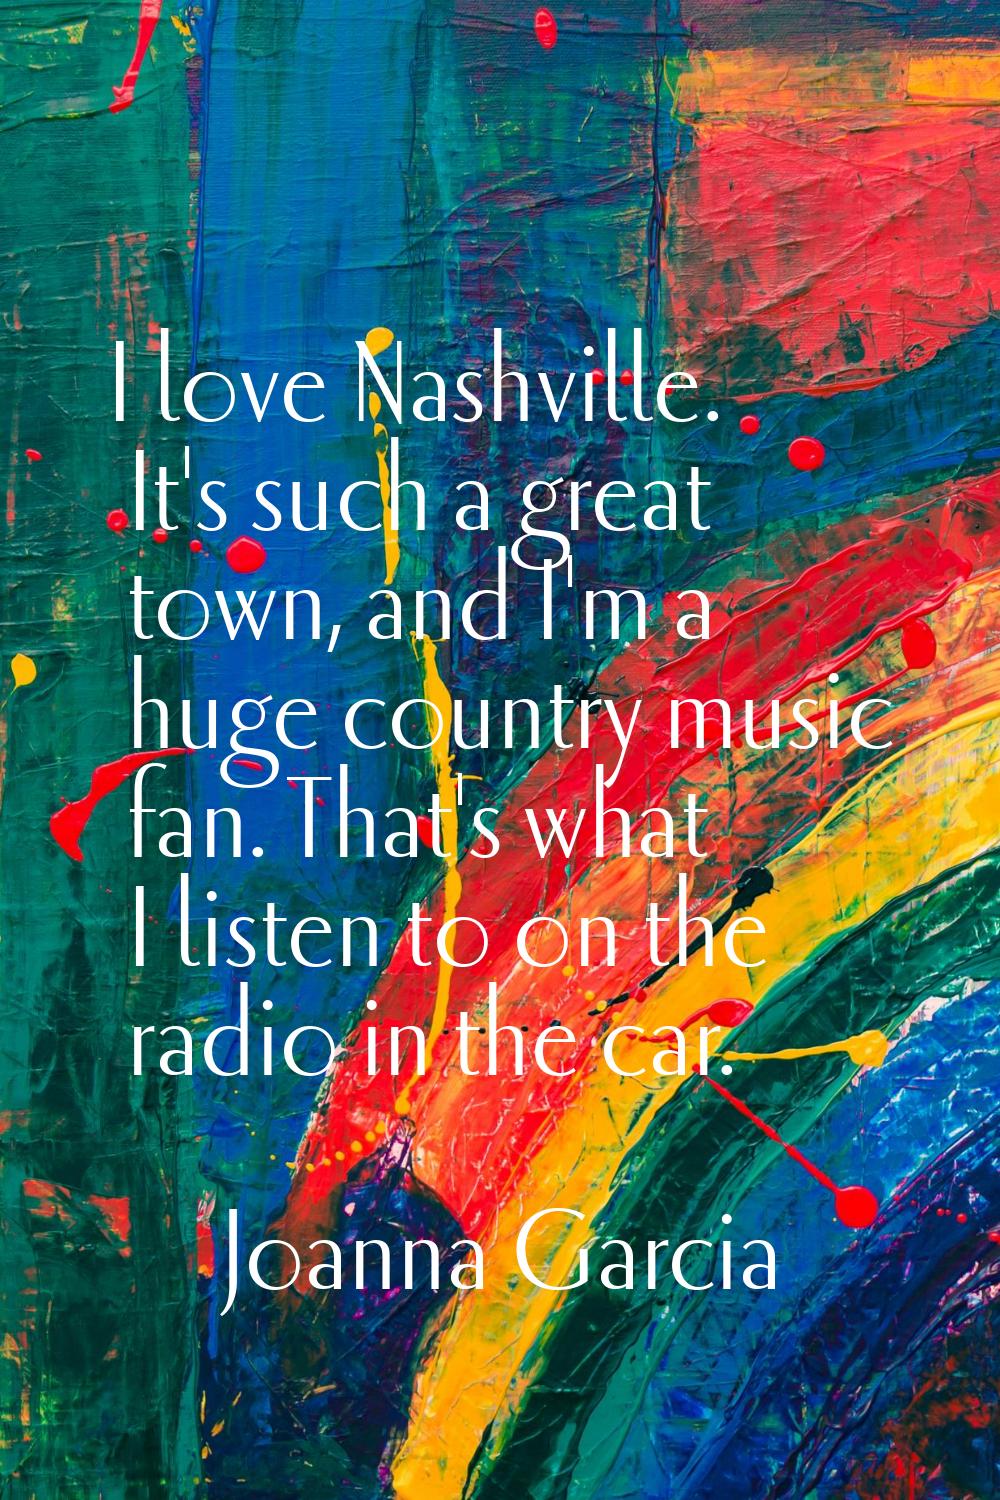 I love Nashville. It's such a great town, and I'm a huge country music fan. That's what I listen to